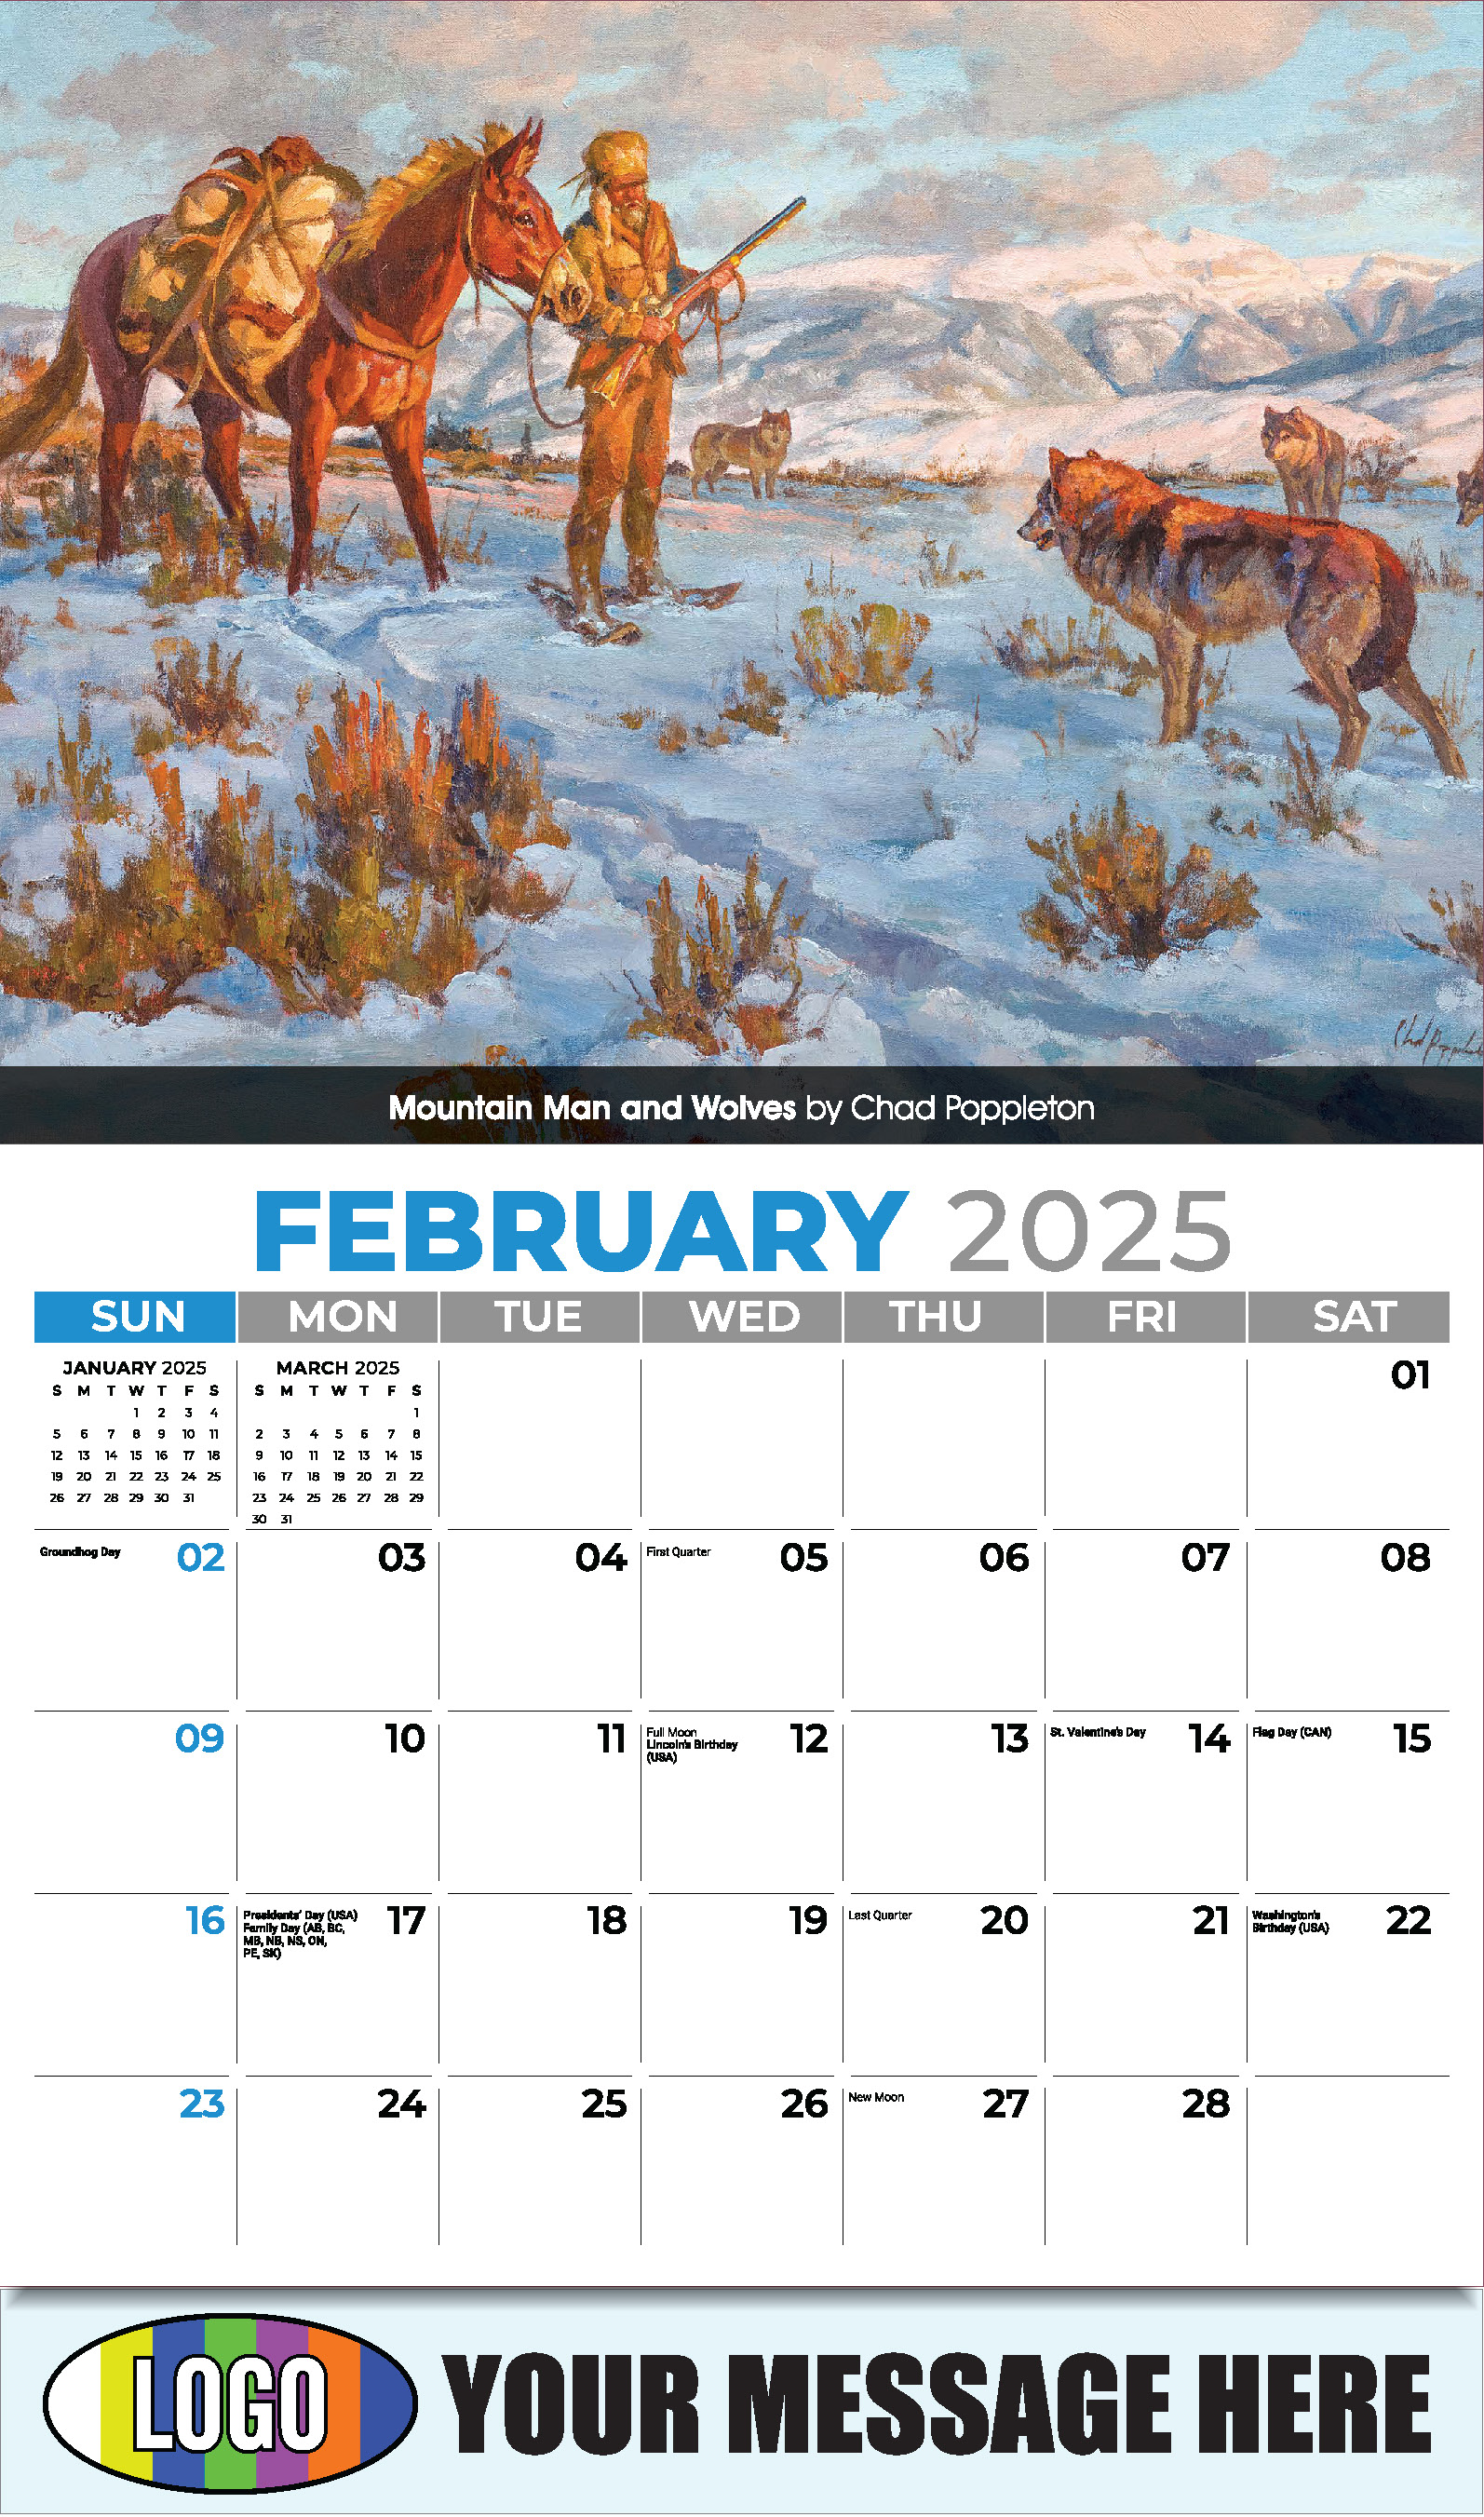 Spirit of the Old West 2025 Old West Art Business Promo Wall Calendar - February